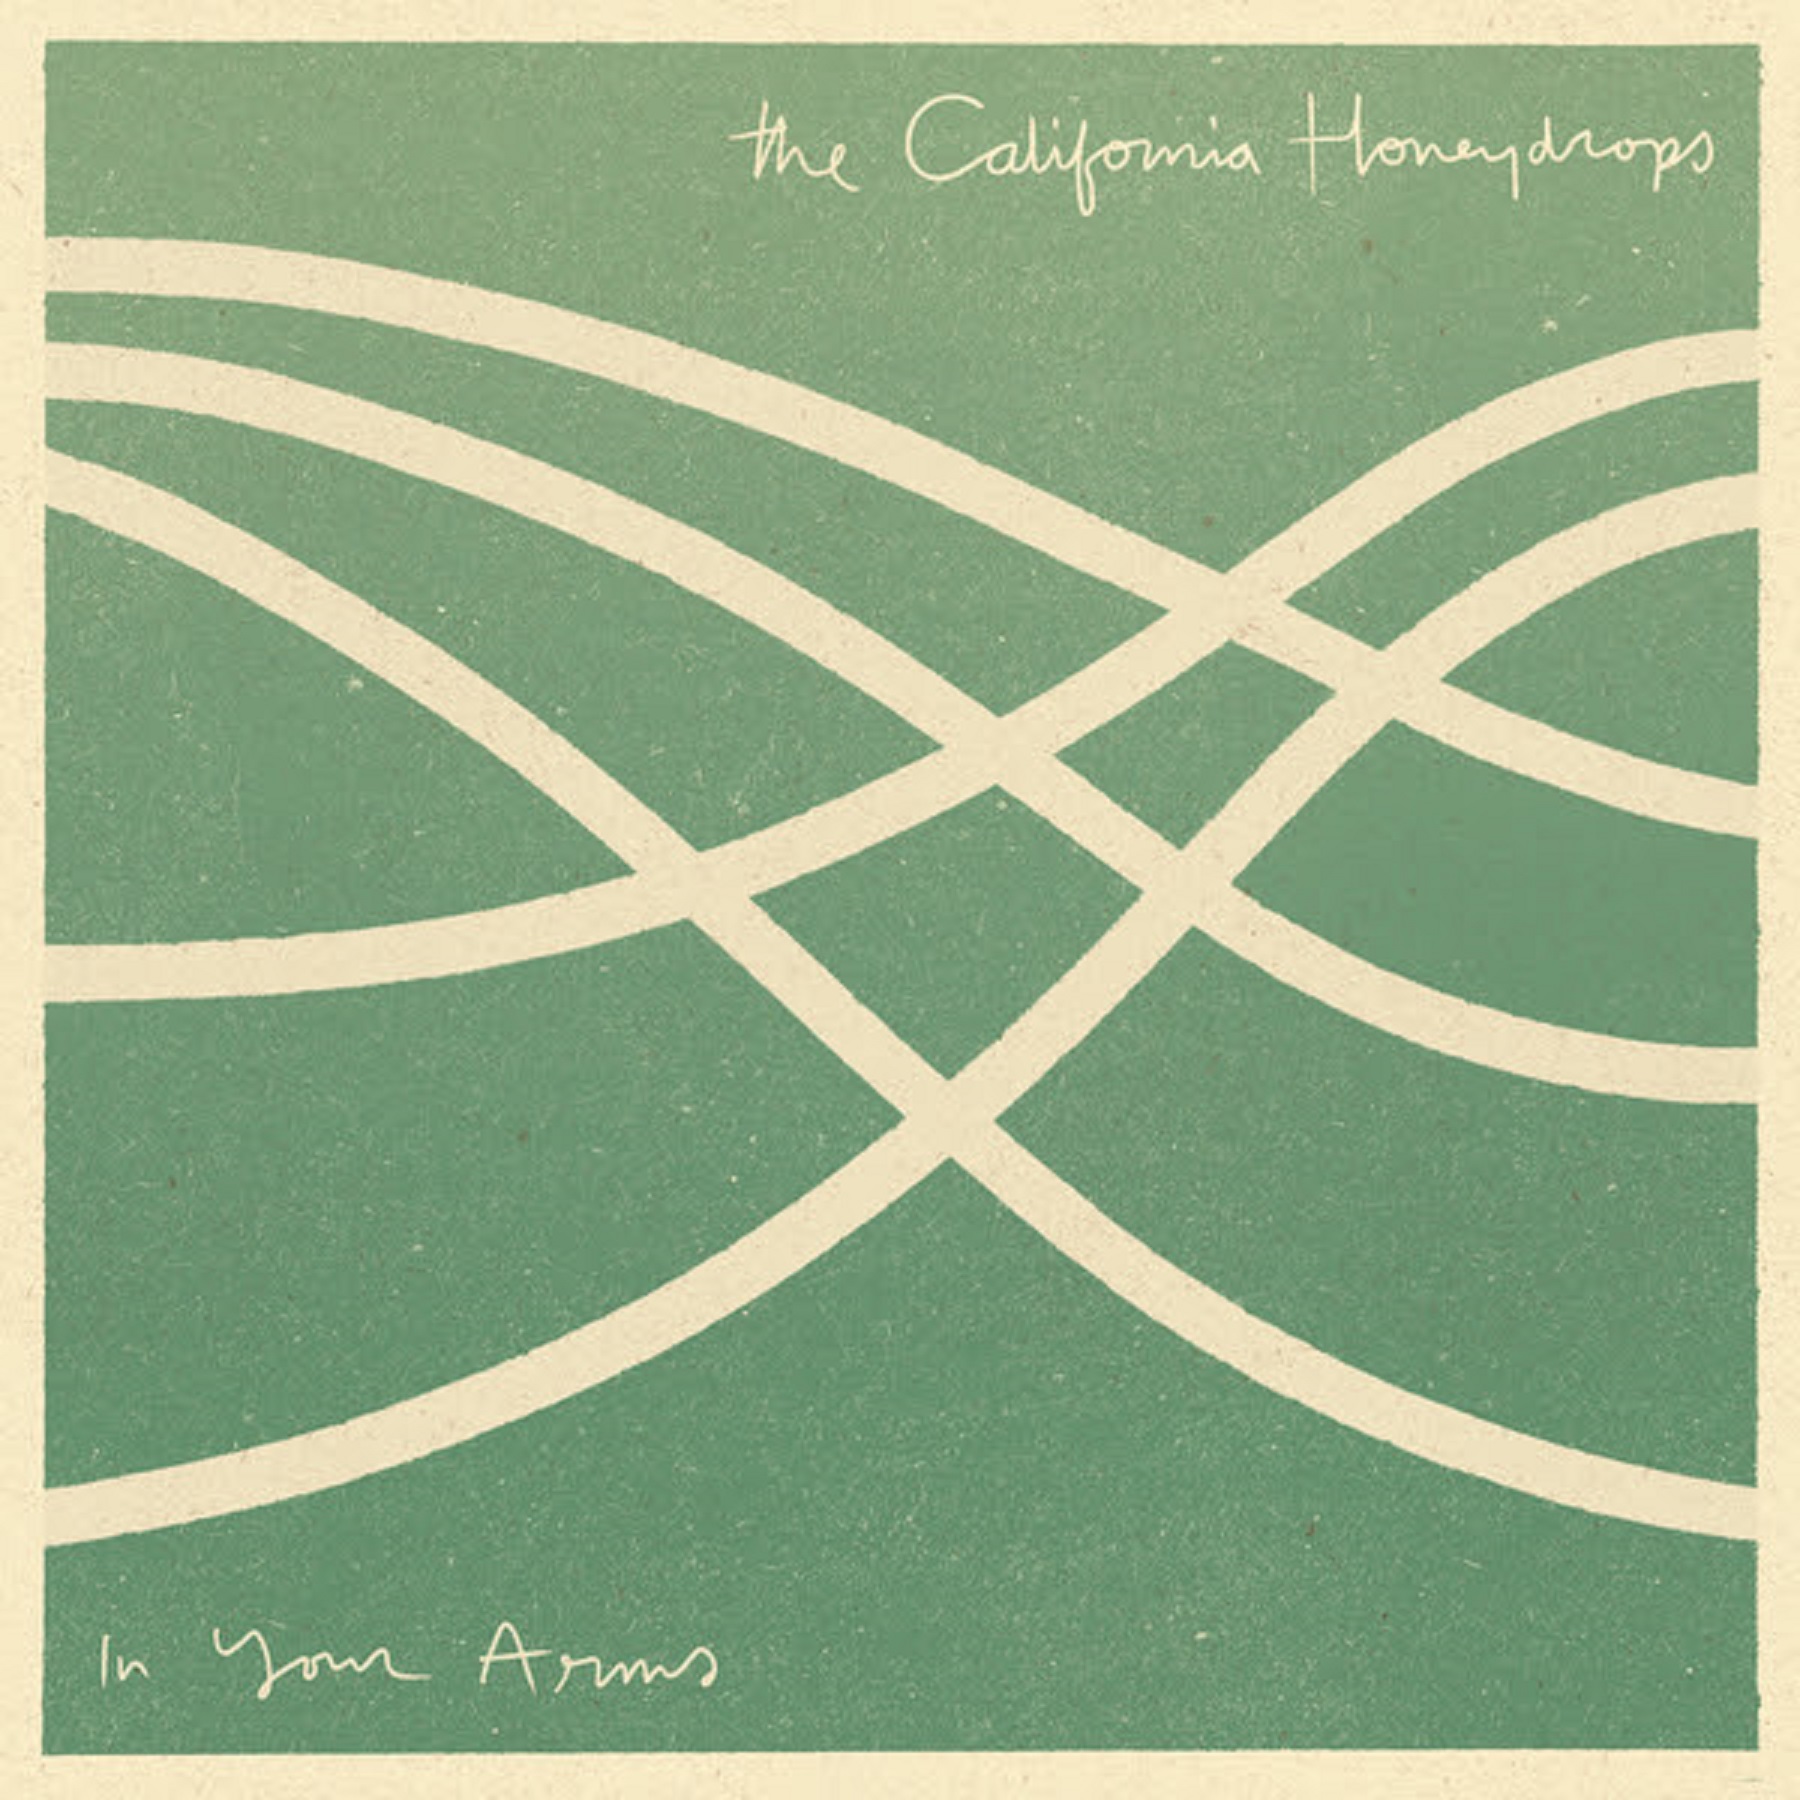 The California Honeydrops Drop A Soulful Ode To Good Lovin’ With New Single “In Your Arms”